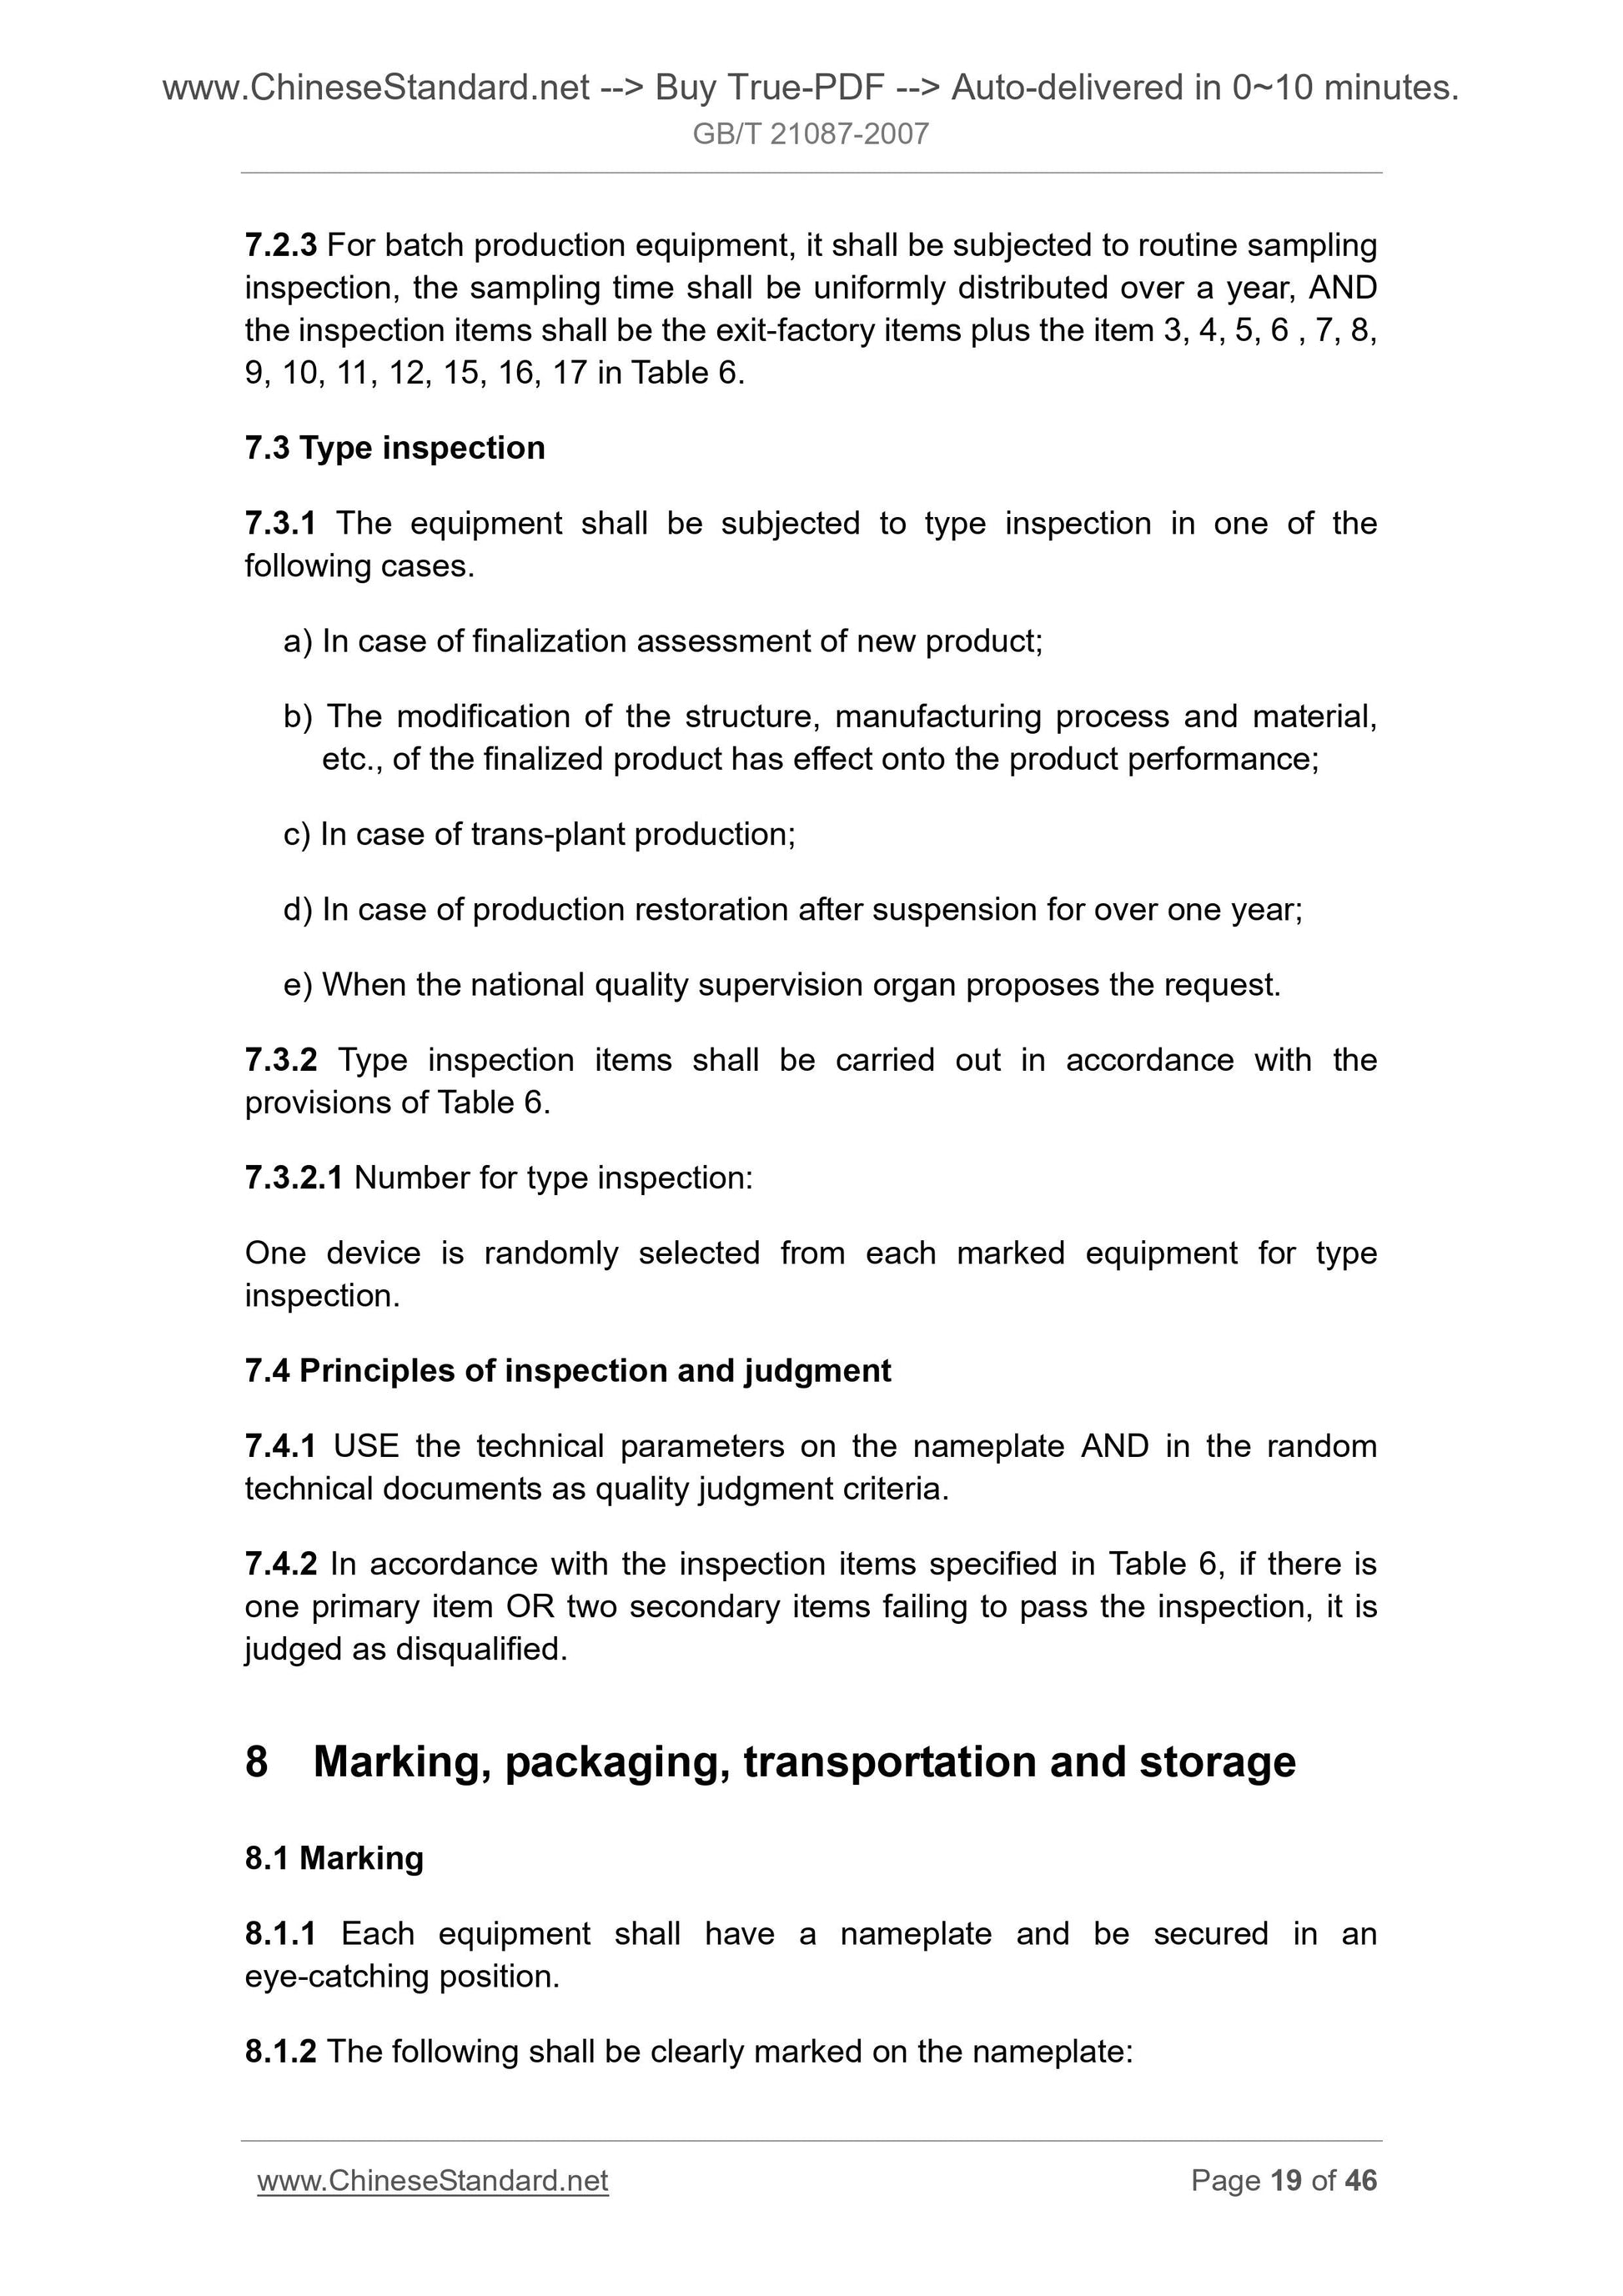 GB/T 21087-2007 Page 12